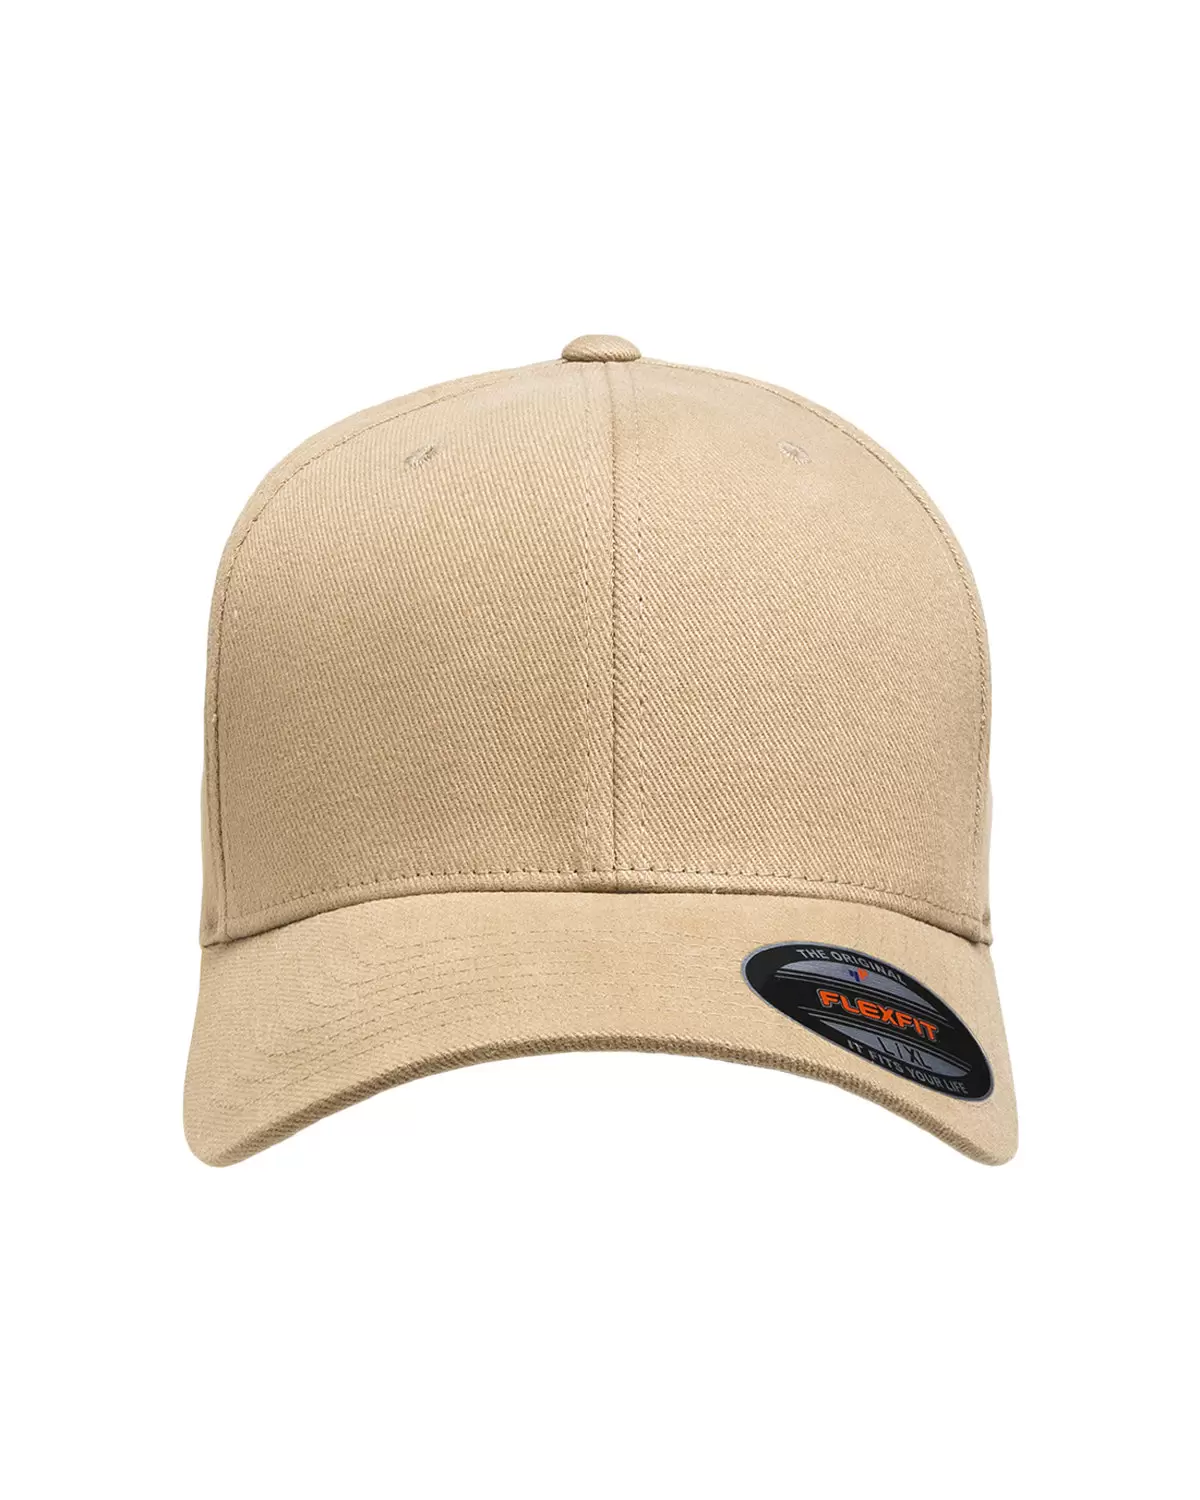 From Flexfit 6377 Twill Brushed - Cap